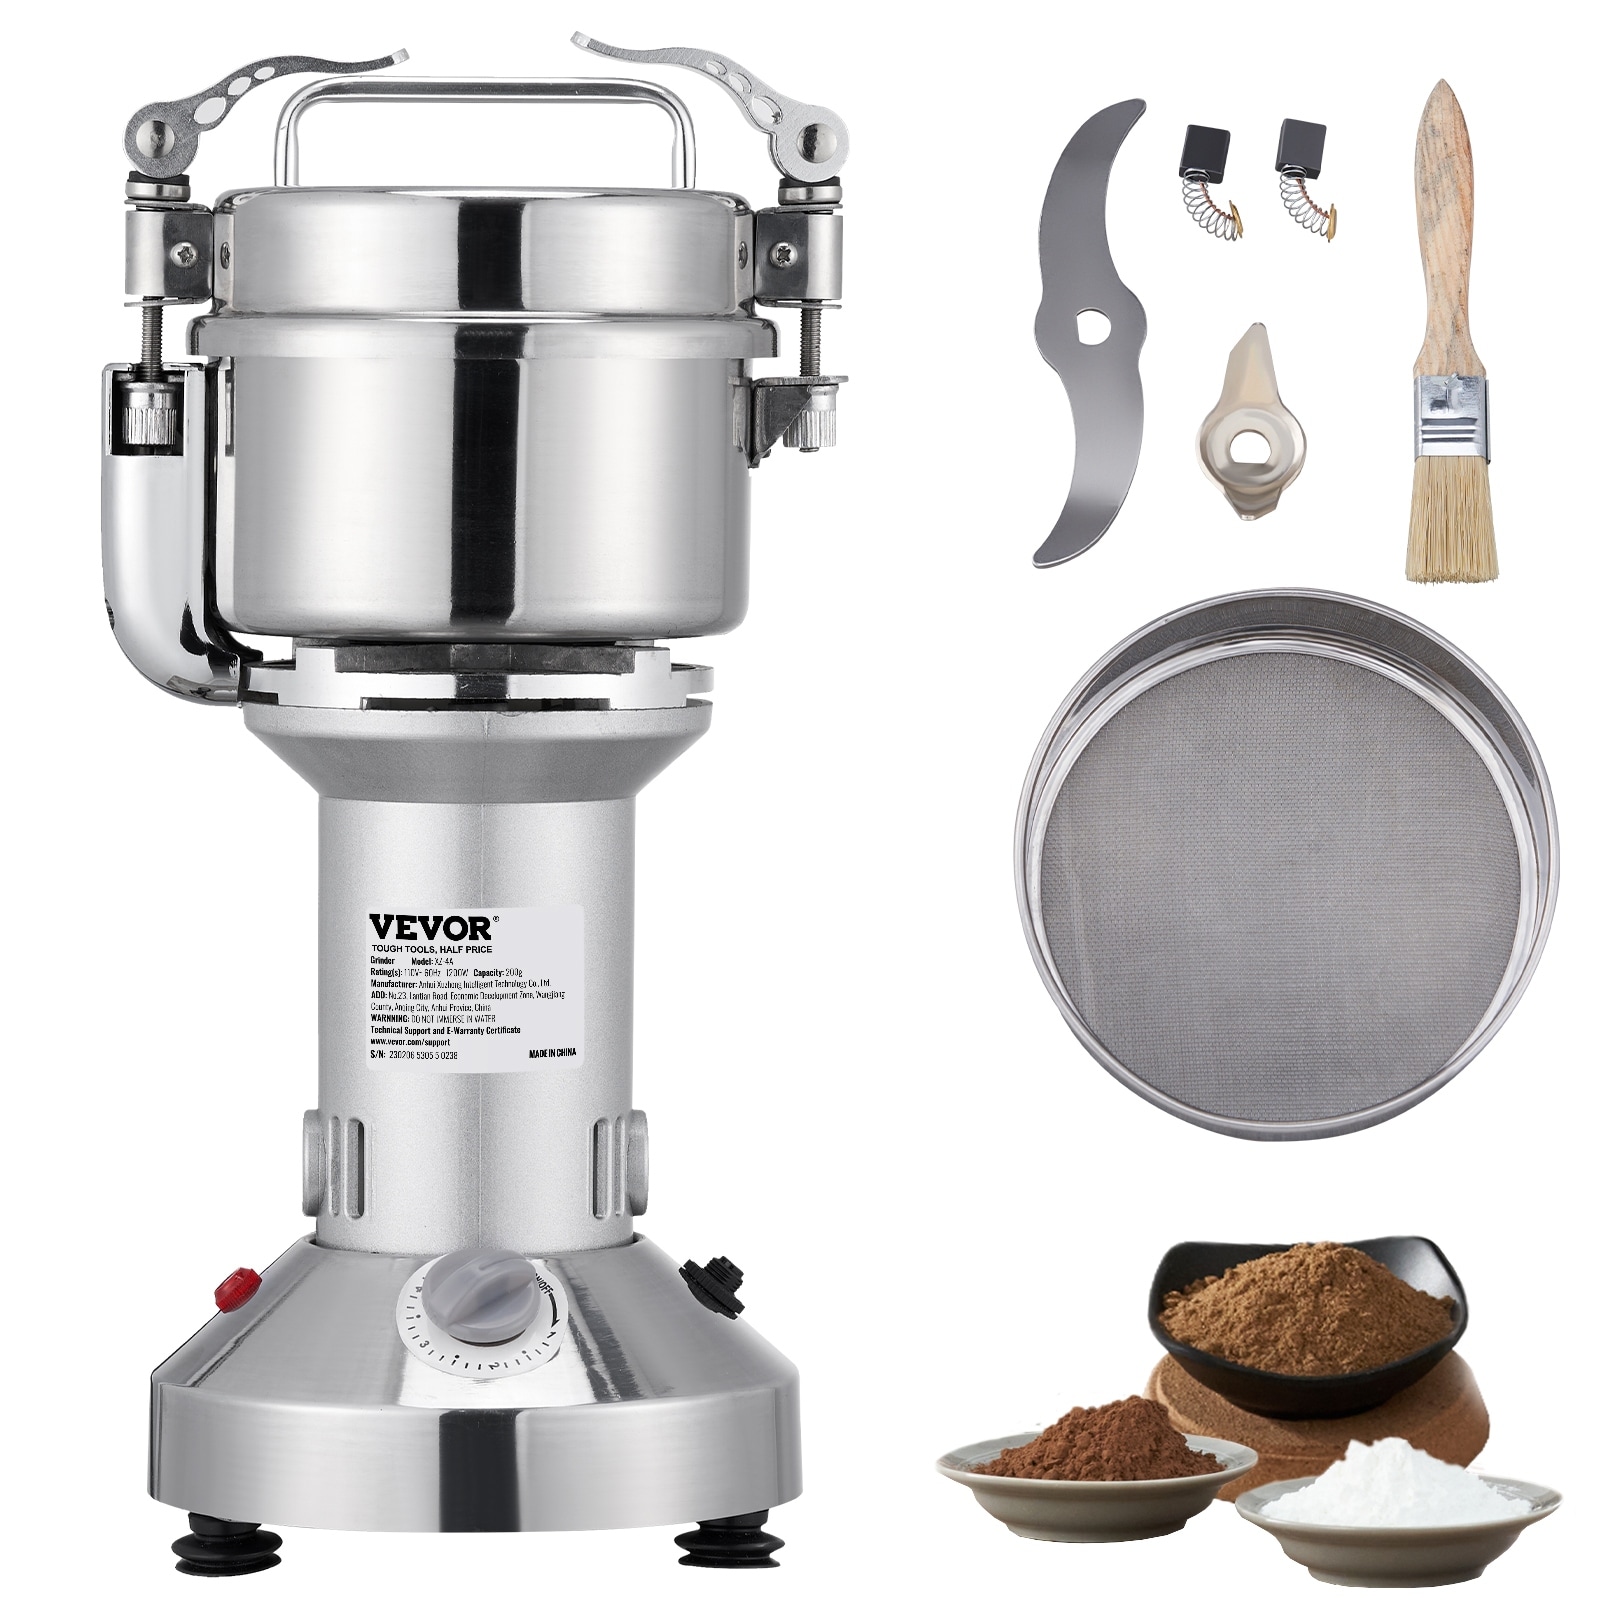 https://ak1.ostkcdn.com/images/products/is/images/direct/59206d5bc63d3ec7da8e0f5bf4b0efb9c53f96e1/VEVOR-Commercial-Grain-Mill-Spice-Grinder-Electric-Grinder-High-Speed.jpg